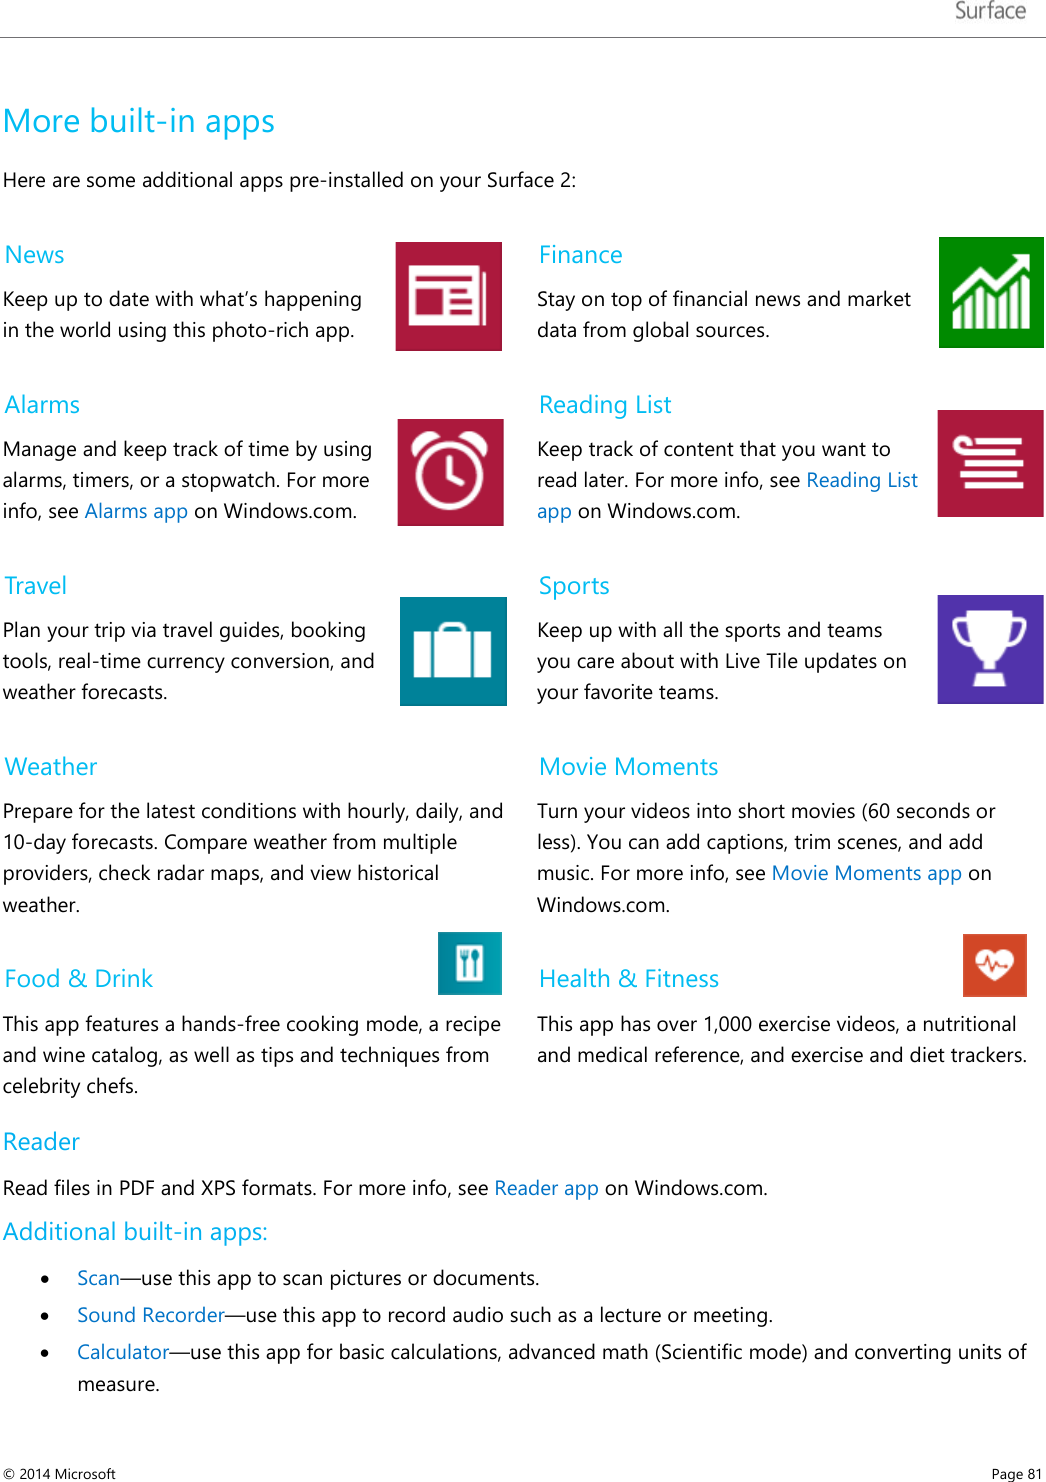   More built-in apps Here are some additional apps pre-installed on your Surface 2: News Keep up to date with what’s happening in the world using this photo-rich app.  Finance Stay on top of financial news and market data from global sources.  Alarms Manage and keep track of time by using alarms, timers, or a stopwatch. For more info, see Alarms app on Windows.com.  Reading List Keep track of content that you want to read later. For more info, see Reading List app on Windows.com.  Travel Plan your trip via travel guides, booking tools, real-time currency conversion, and weather forecasts.  Sports Keep up with all the sports and teams you care about with Live Tile updates on your favorite teams. Weather Prepare for the latest conditions with hourly, daily, and 10-day forecasts. Compare weather from multiple providers, check radar maps, and view historical weather.  Movie Moments Turn your videos into short movies (60 seconds or less). You can add captions, trim scenes, and add music. For more info, see Movie Moments app on Windows.com. Food &amp; Drink This app features a hands-free cooking mode, a recipe and wine catalog, as well as tips and techniques from celebrity chefs. Health &amp; Fitness This app has over 1,000 exercise videos, a nutritional and medical reference, and exercise and diet trackers. Reader Read files in PDF and XPS formats. For more info, see Reader app on Windows.com. Additional built-in apps: • Scan—use this app to scan pictures or documents.  • Sound Recorder—use this app to record audio such as a lecture or meeting.  • Calculator—use this app for basic calculations, advanced math (Scientific mode) and converting units of measure.    © 2014 Microsoft     Page 81  